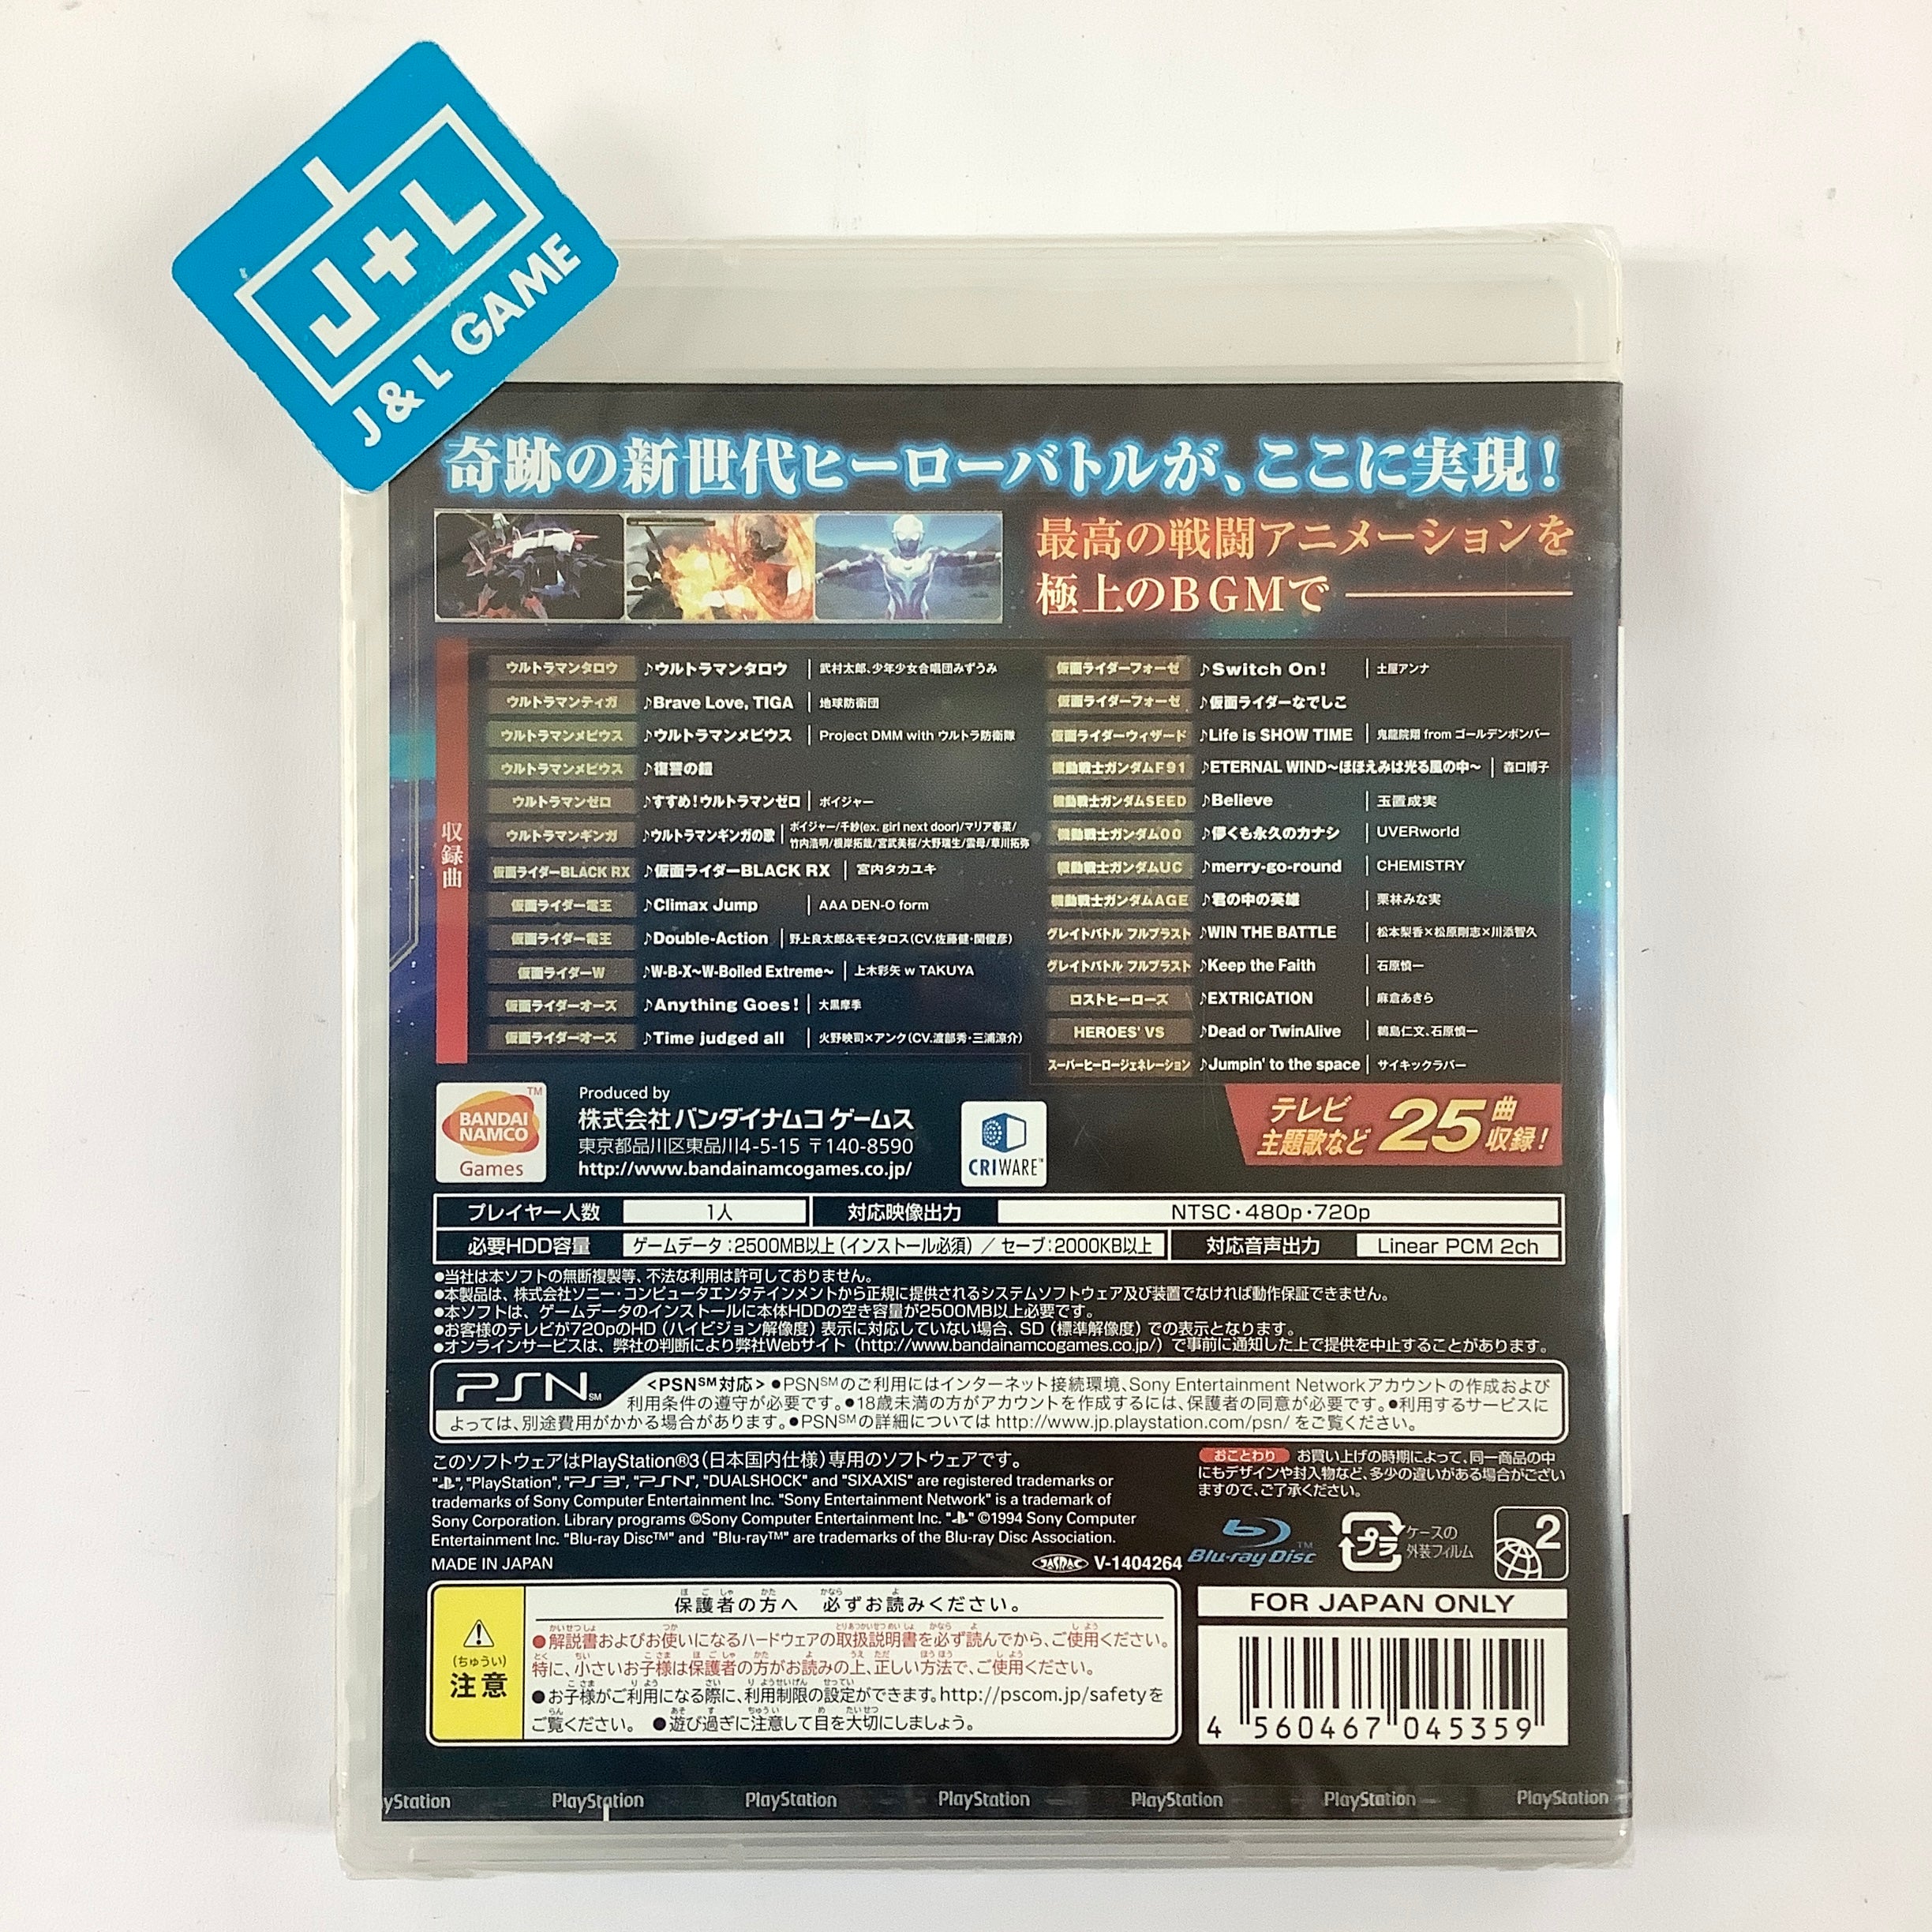 Super Hero Generation (Special Sound Edition) - (PS3) PlayStation 3 (Japanese Import) Video Games Bandai Namco Games   